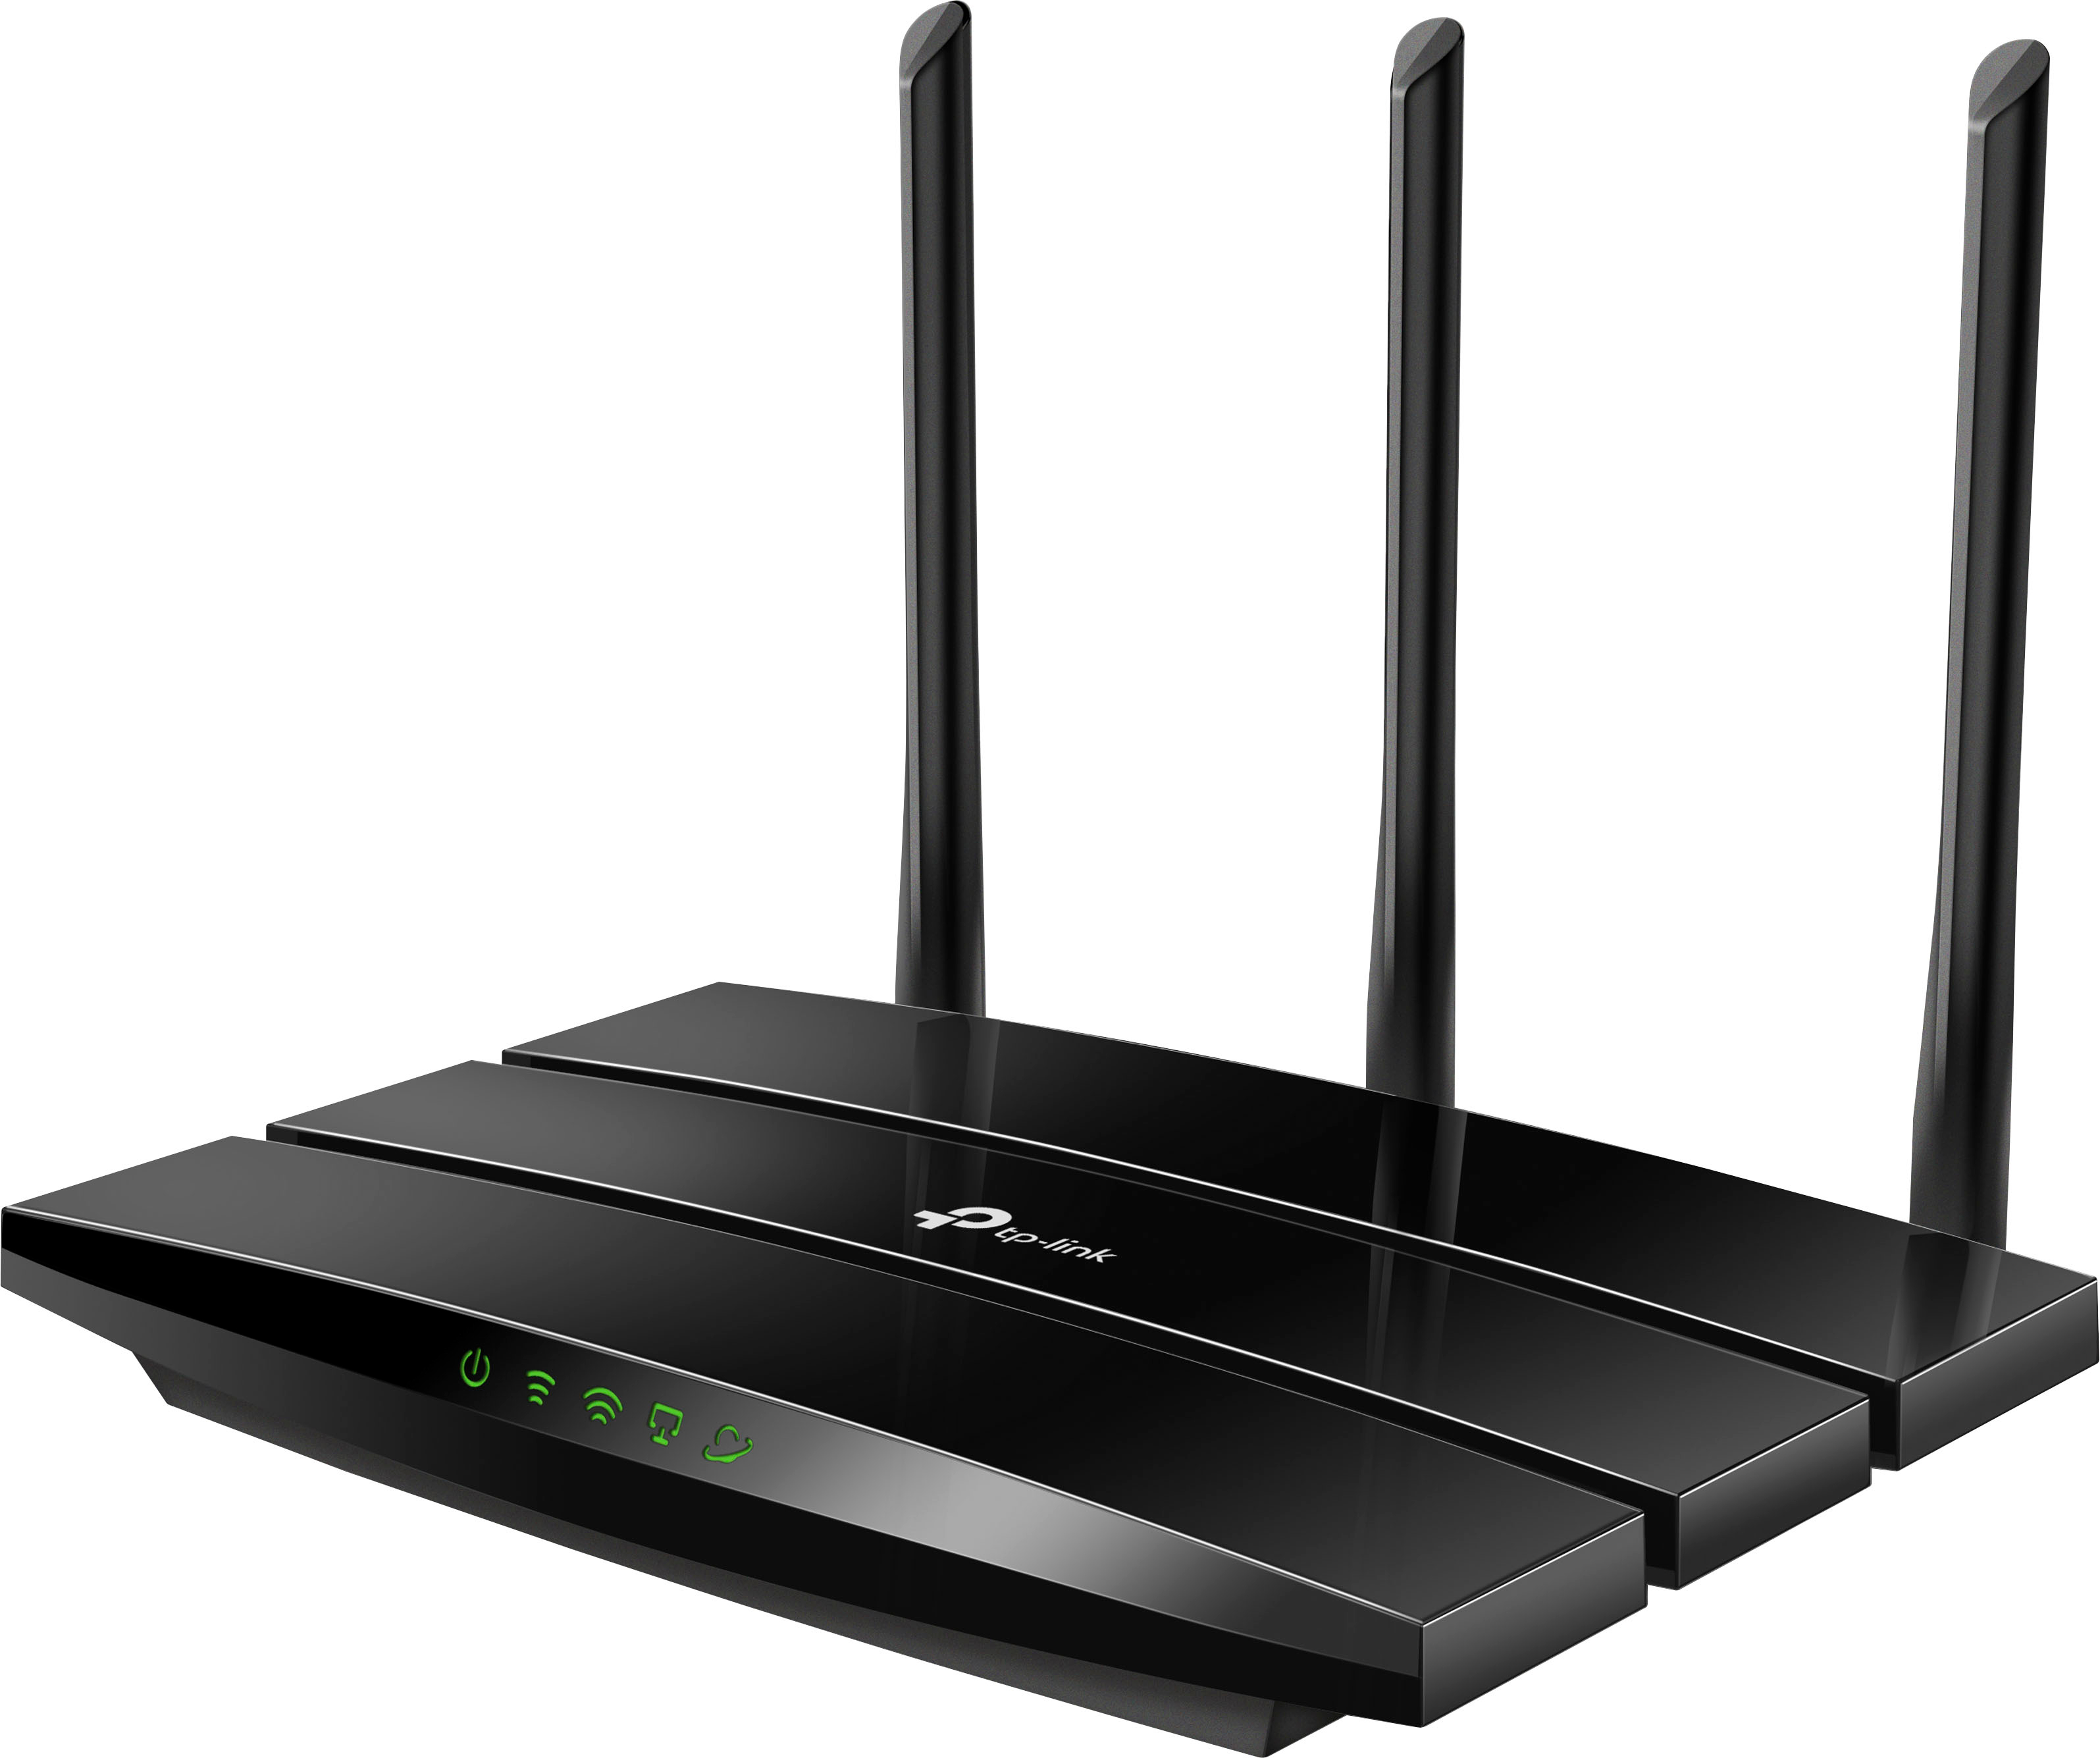 Angle View: TP-Link - Archer AC1750 Dual-Band Wi-Fi 5 Router - Black